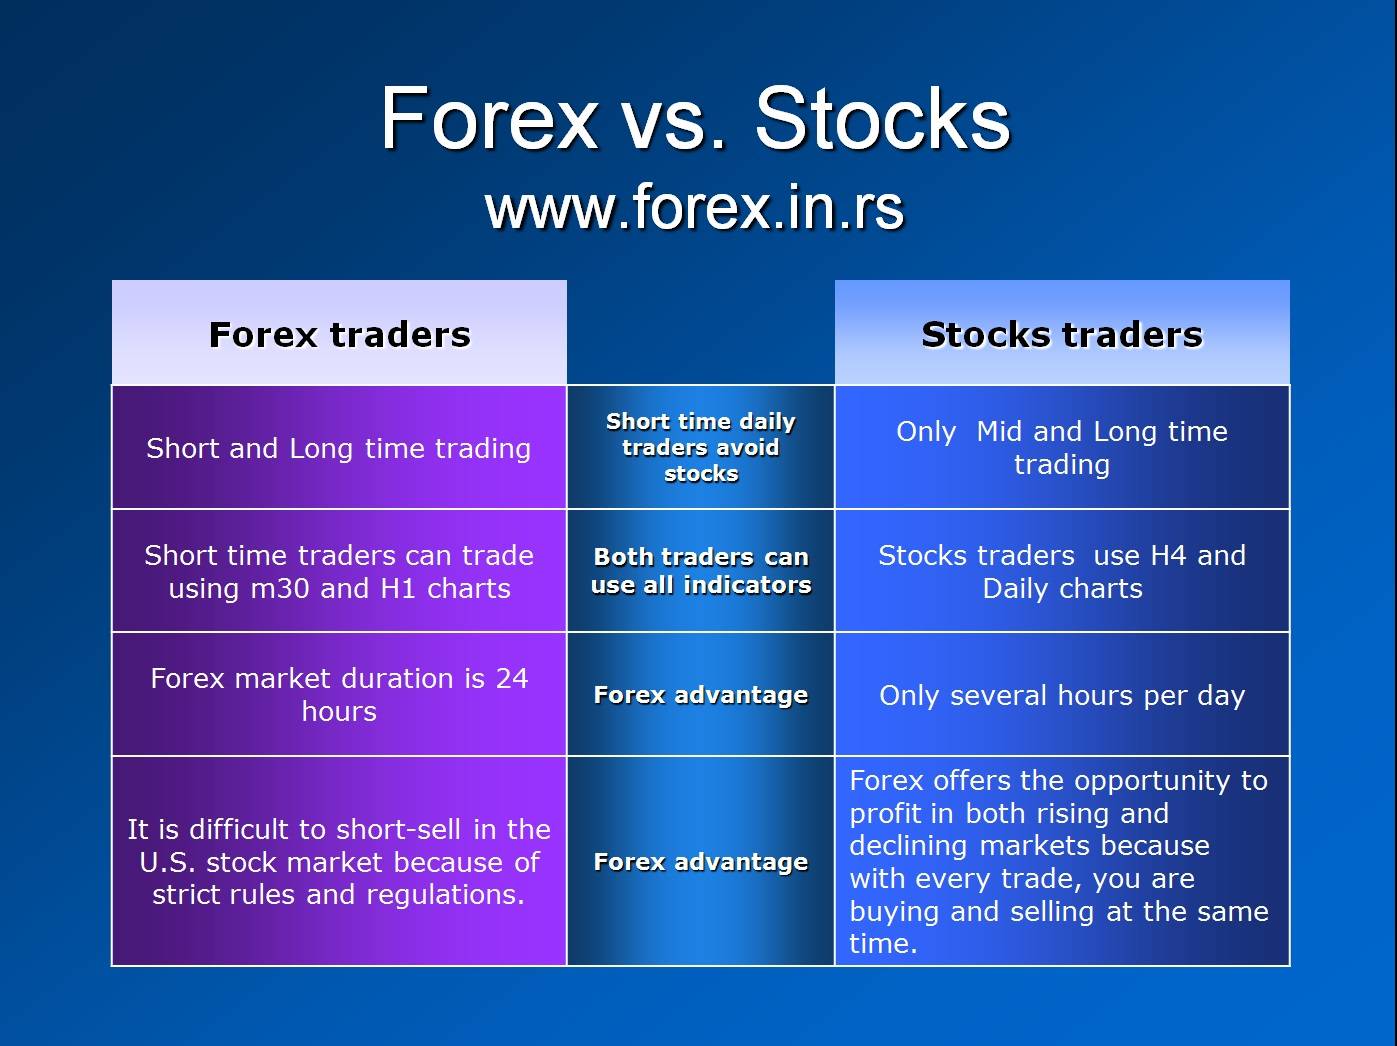 How stocks are better than forex david swenson investing in bonds